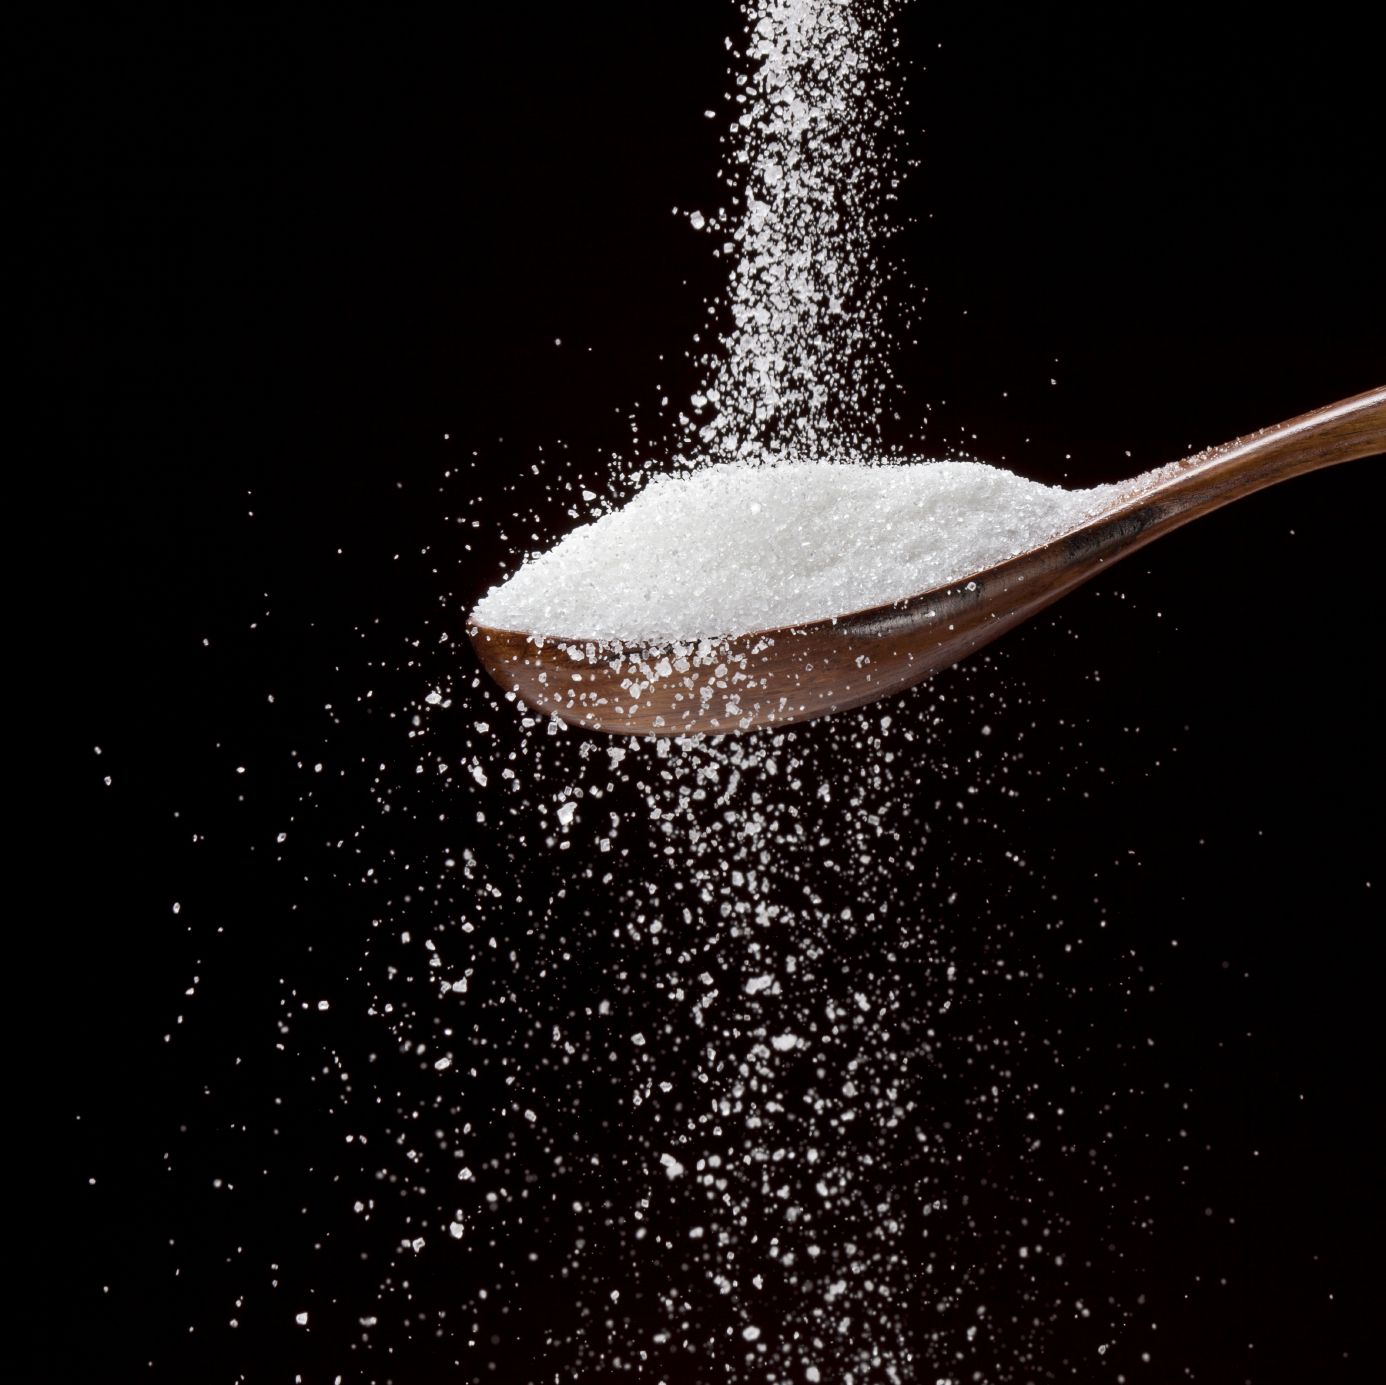 Refined Sugar vs. Saturated Fat: What’s More Likely To Cause Coronary Heart Disease?